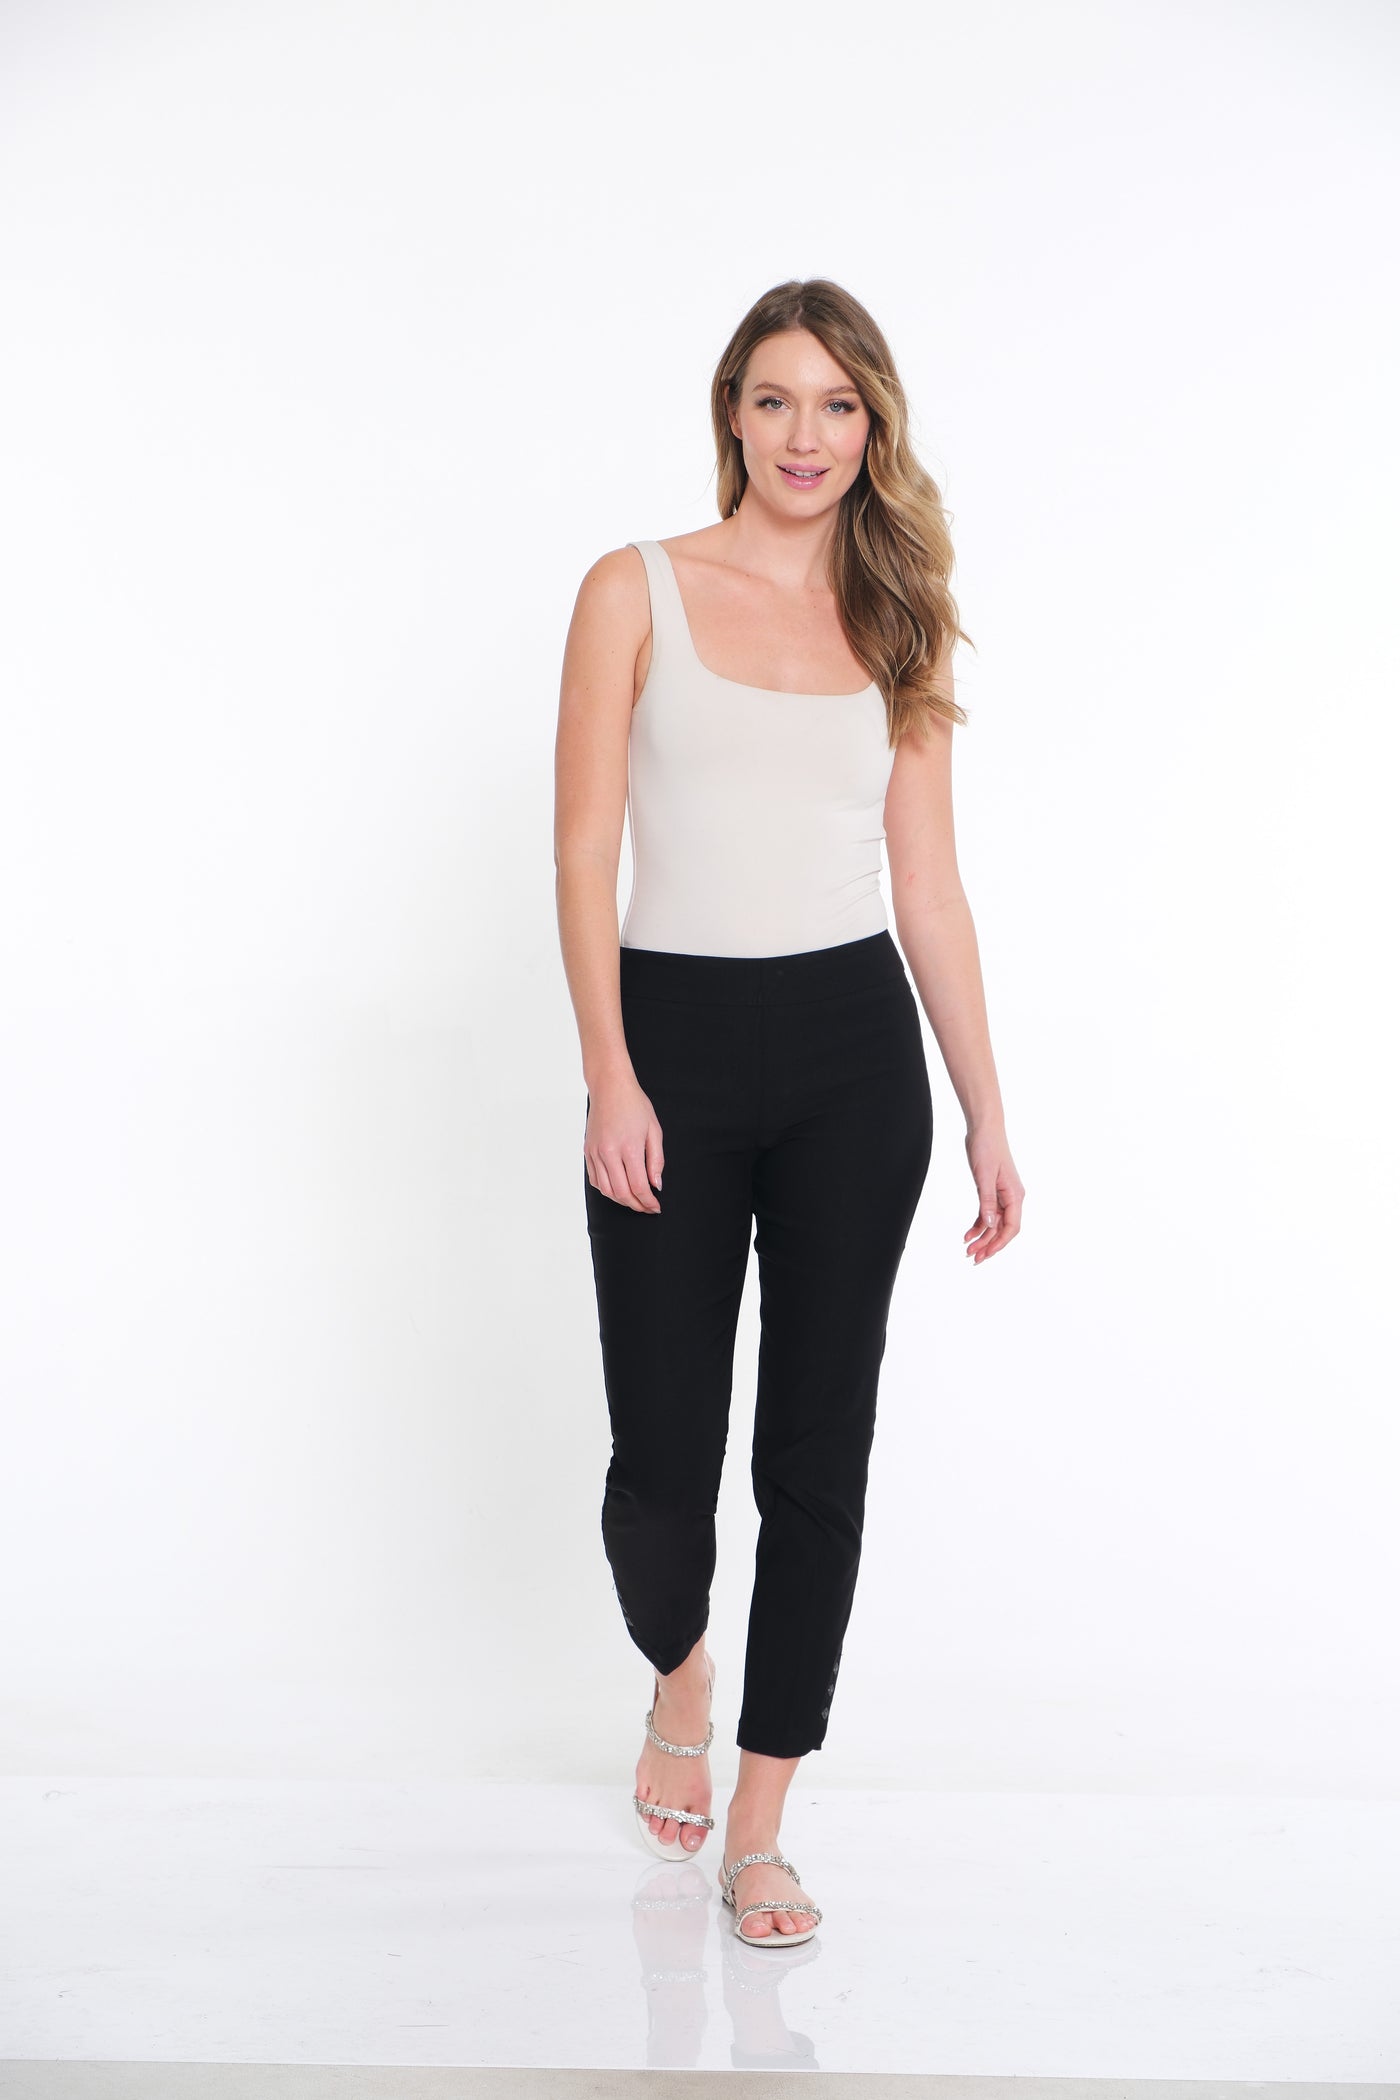 PULL-ON ANKLE PANT with BUTTON TULIP HEM - Black